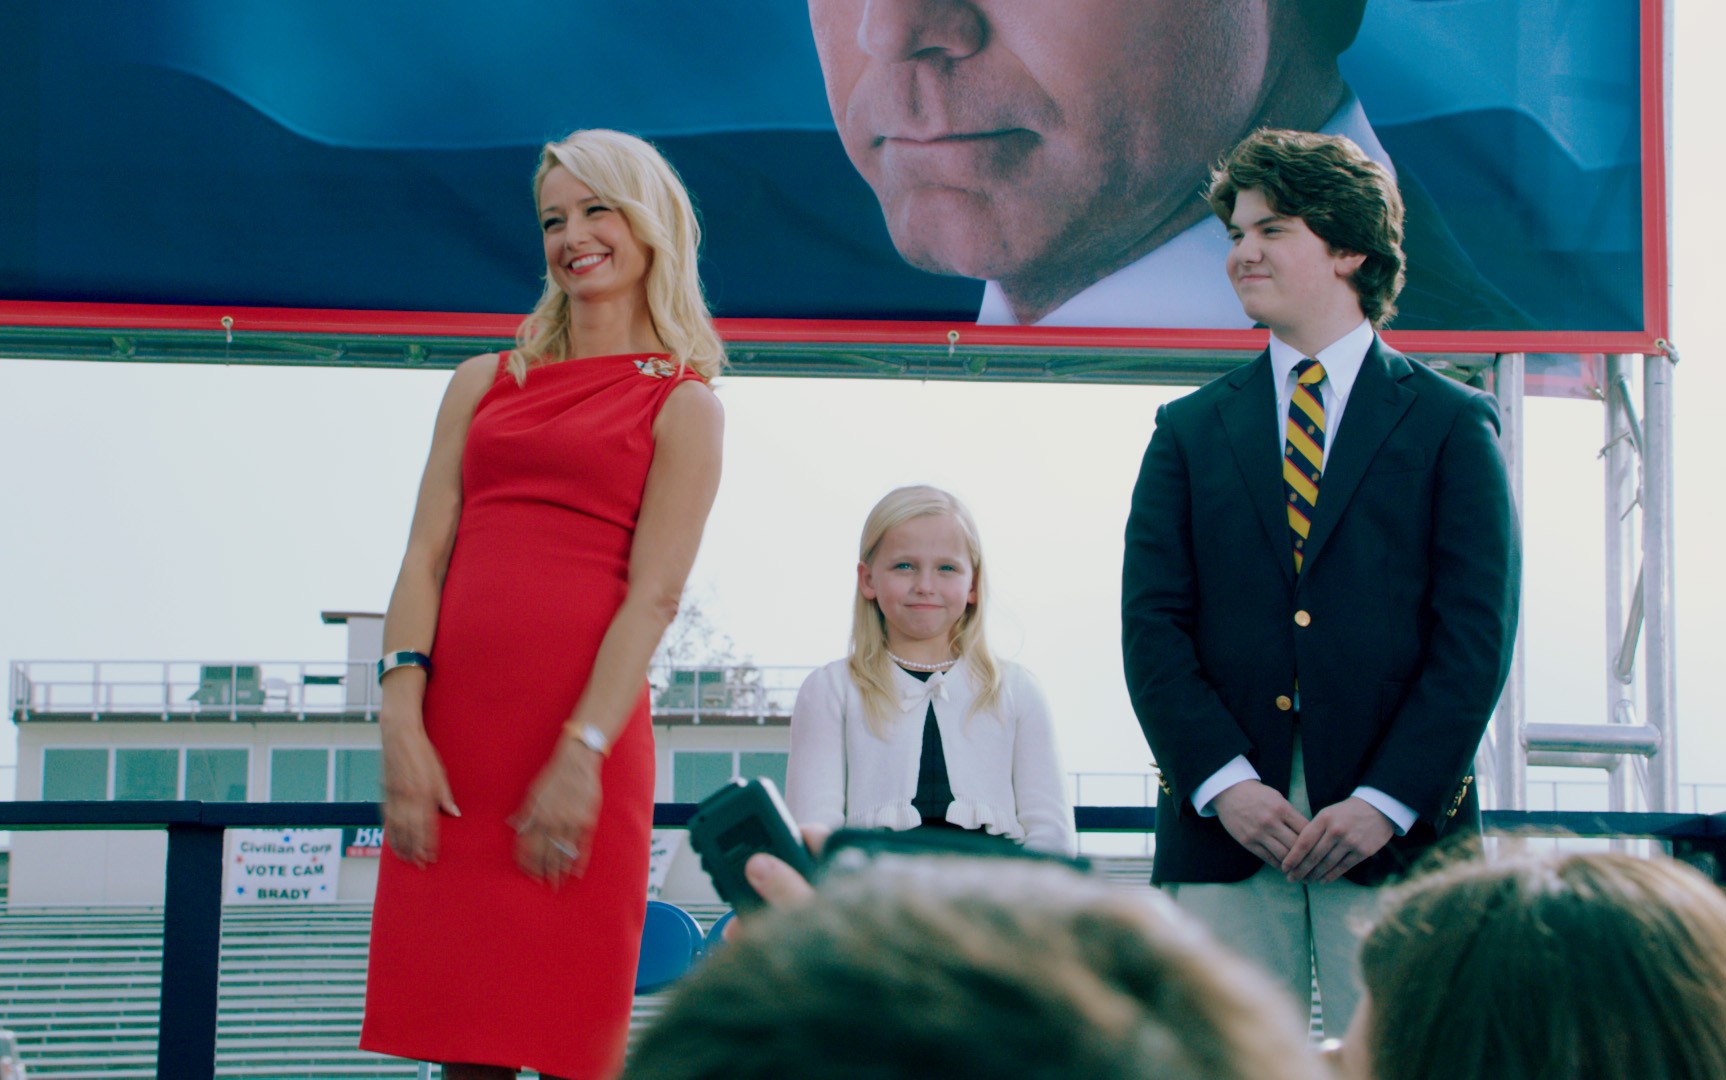 Katherine LaNasa, Madison Wolfe and Randall D. Cunningham in Warner Bros. Pictures' The Campaign (2012)